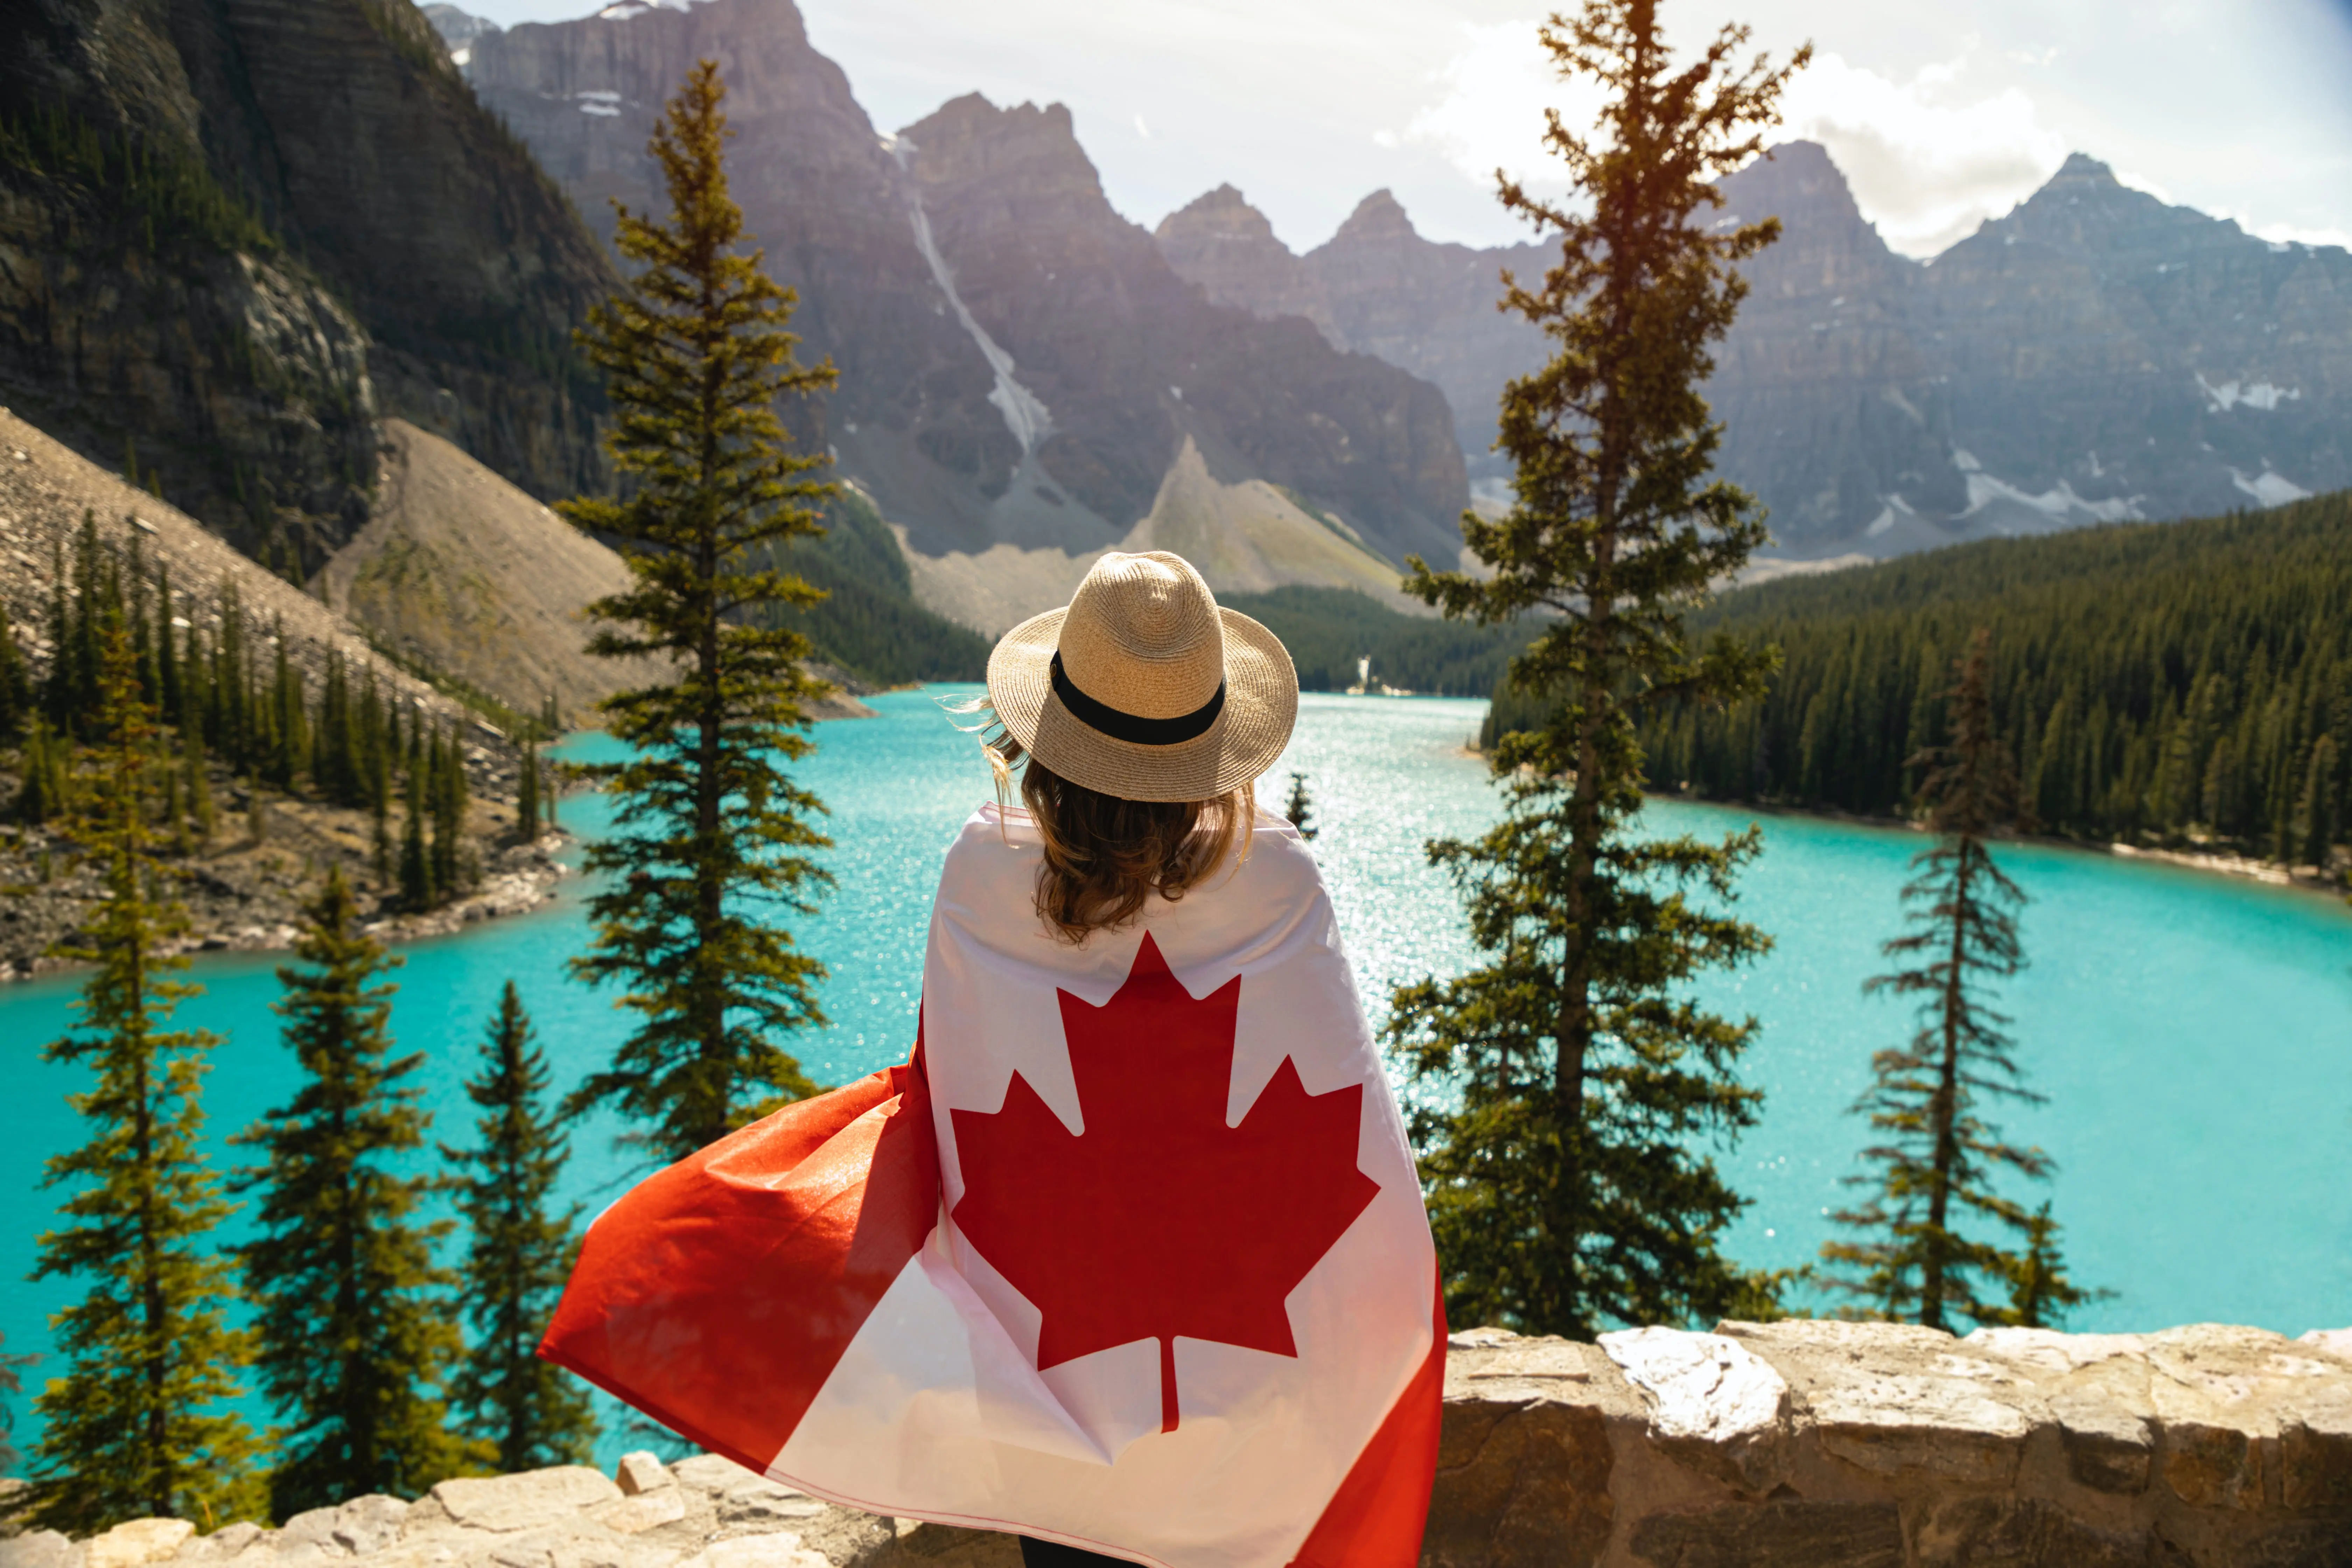 Canadian flag being held behind a woman's body, overlooking the mountains.